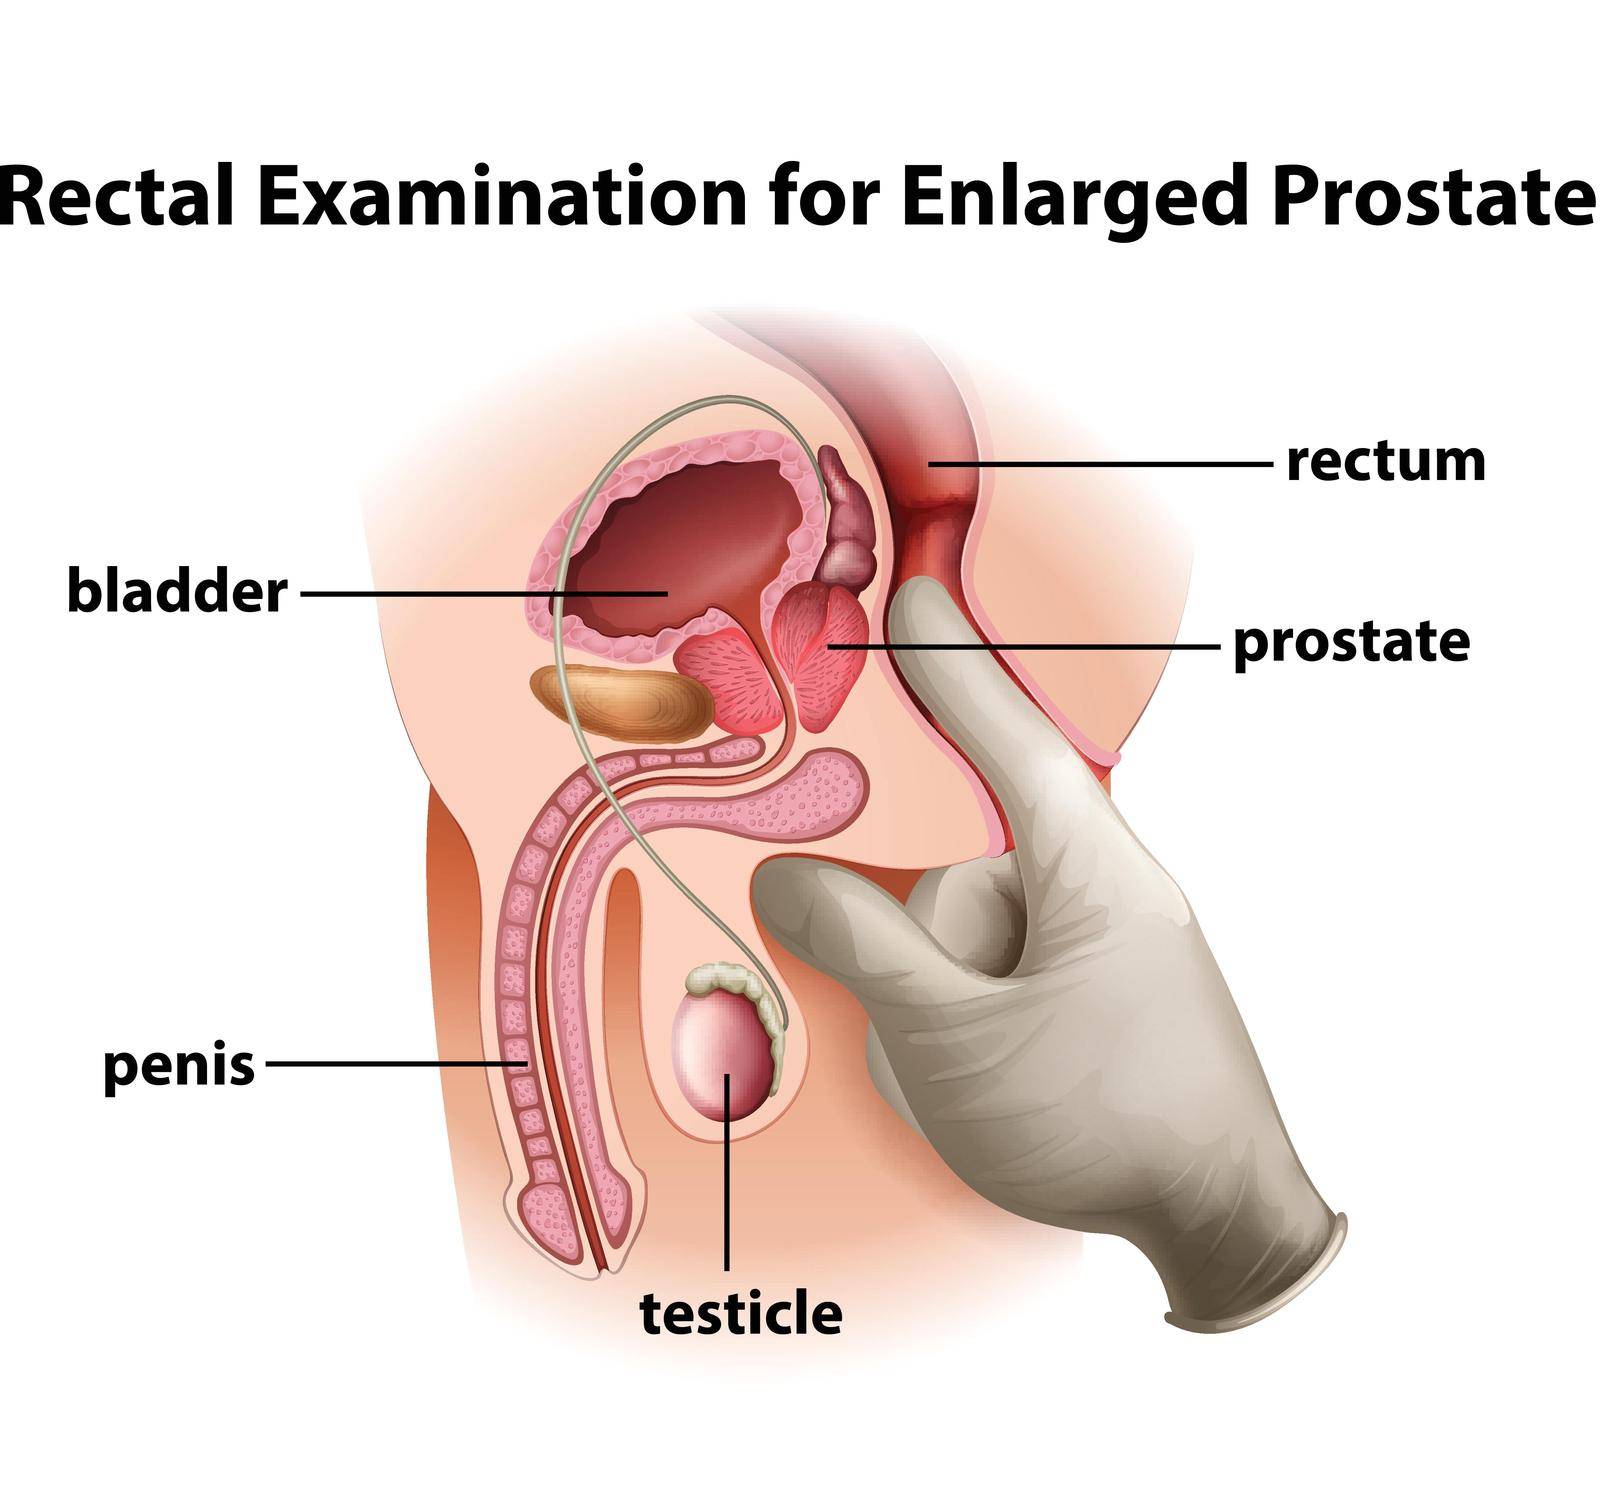 Rectal Examination for Enlarged Prostate by iimages